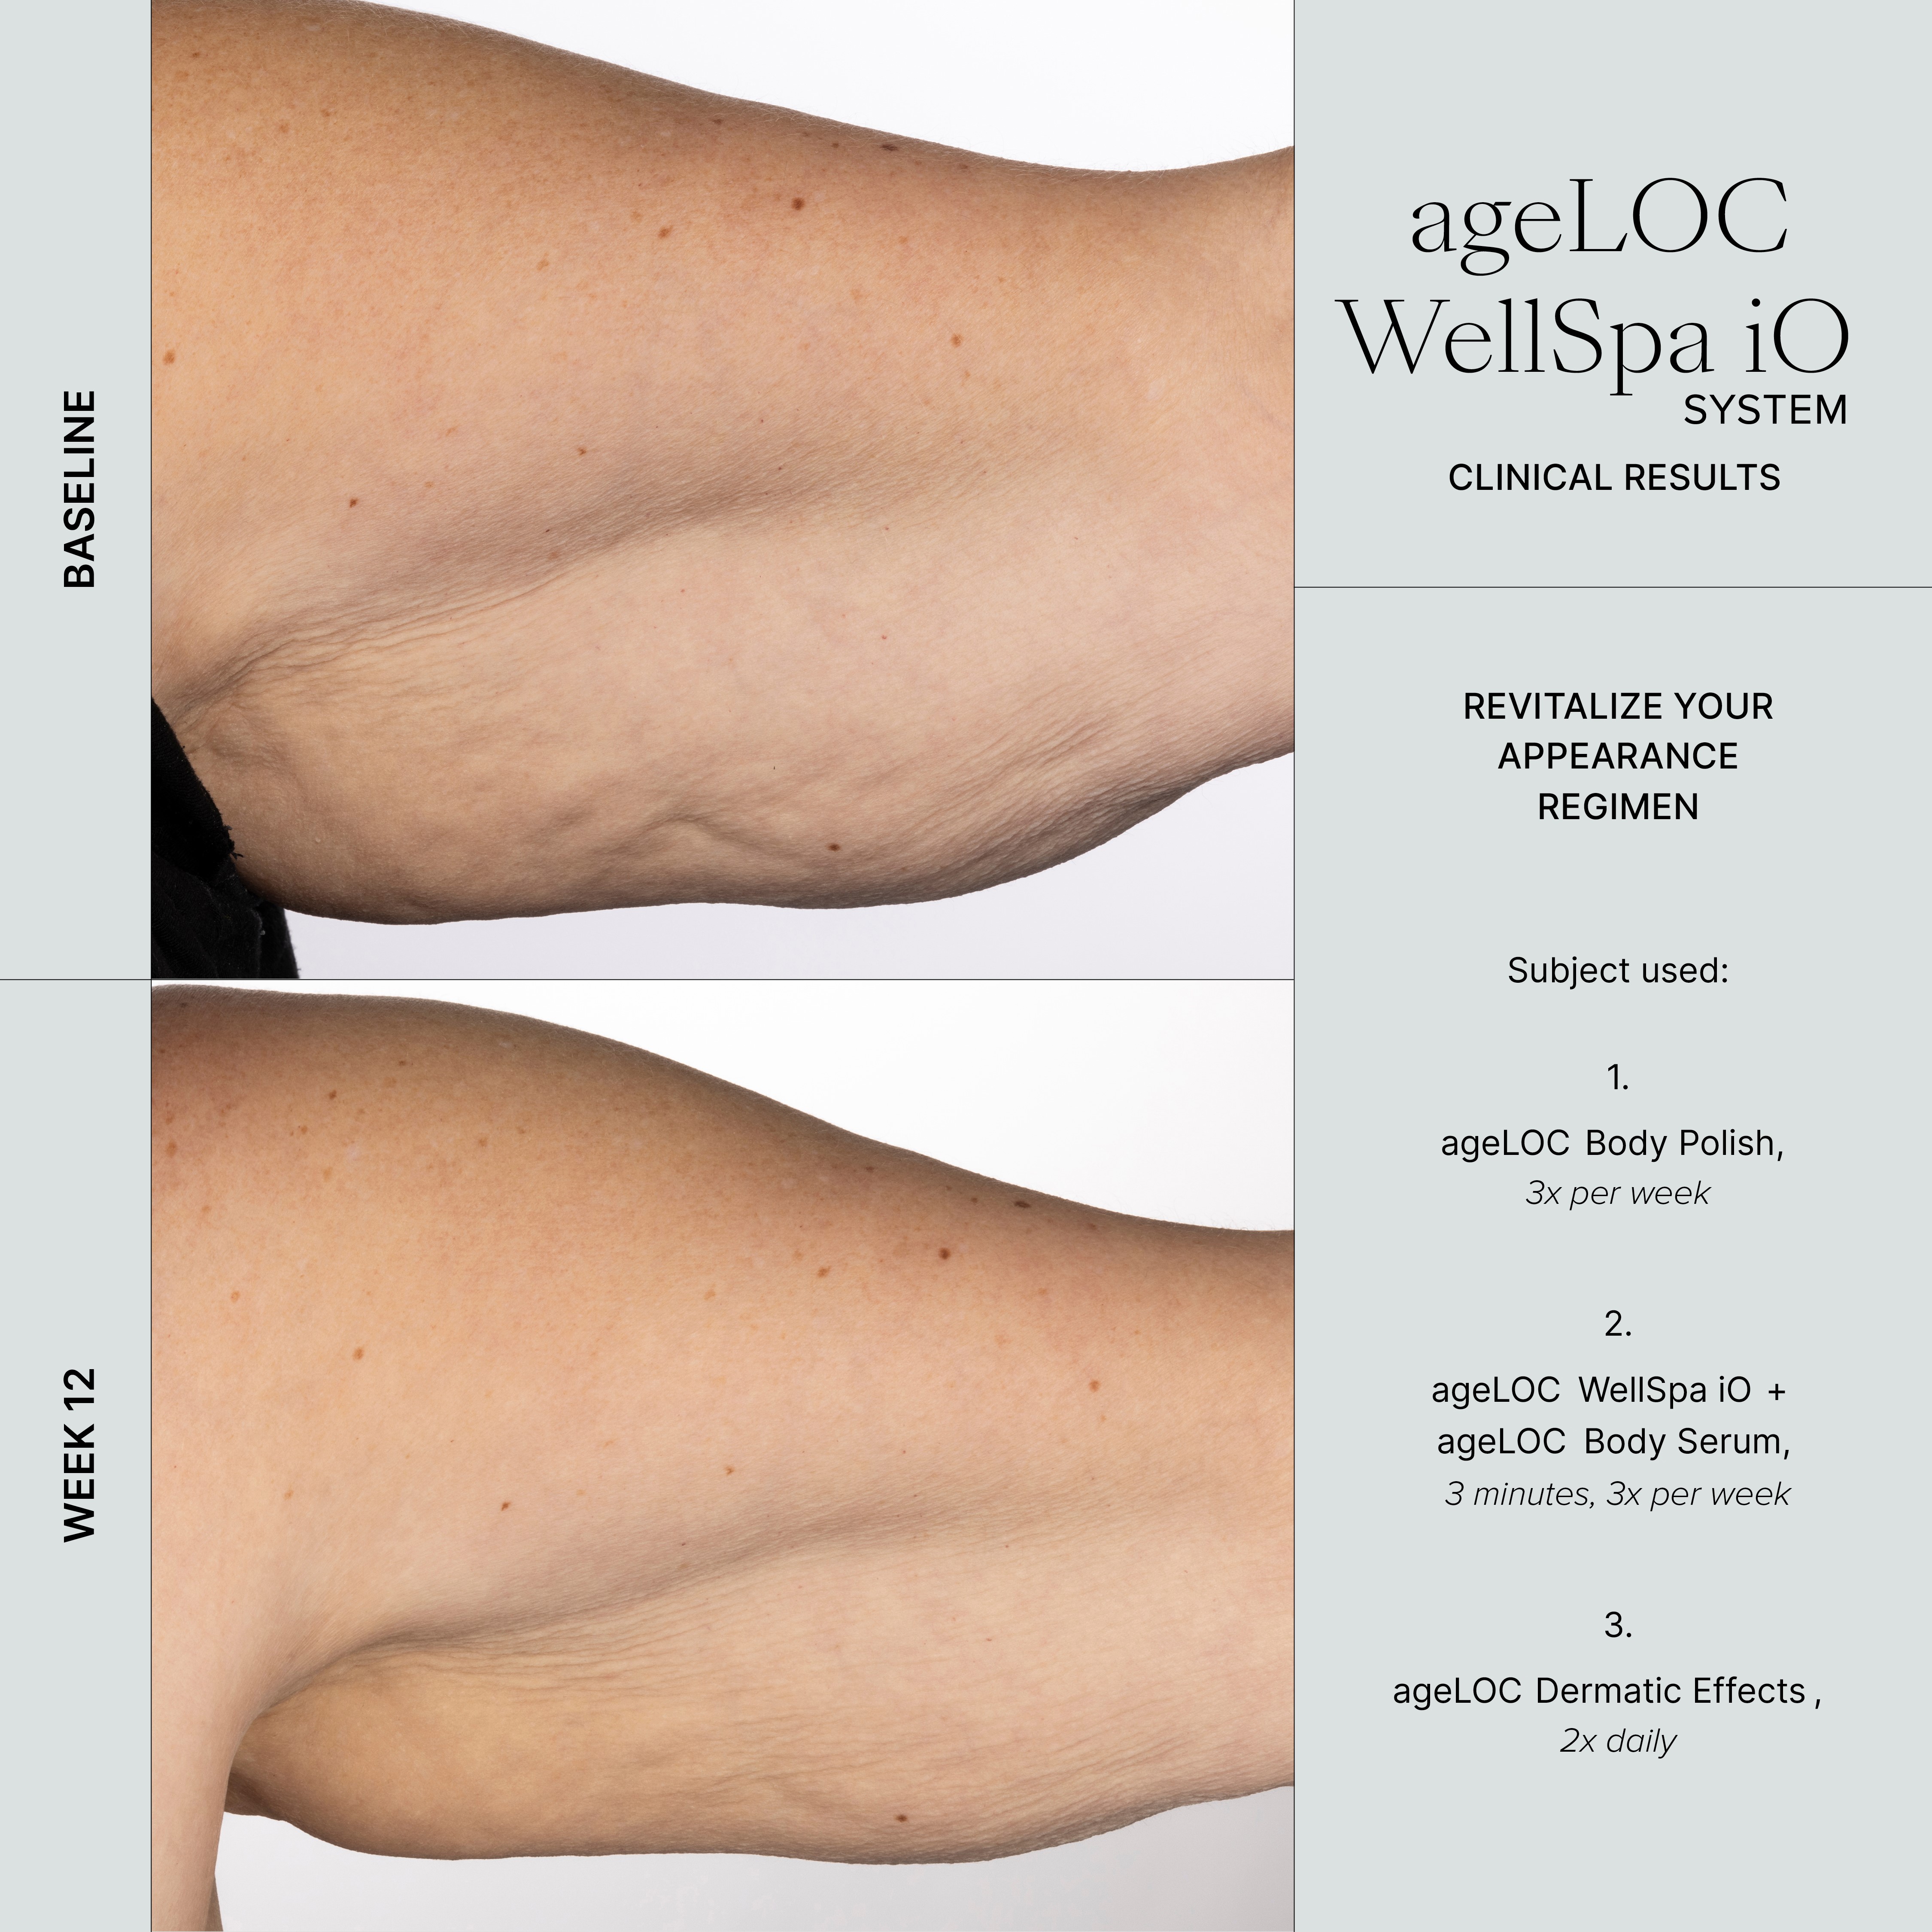 WellSpa iO before after 3min 3x arm